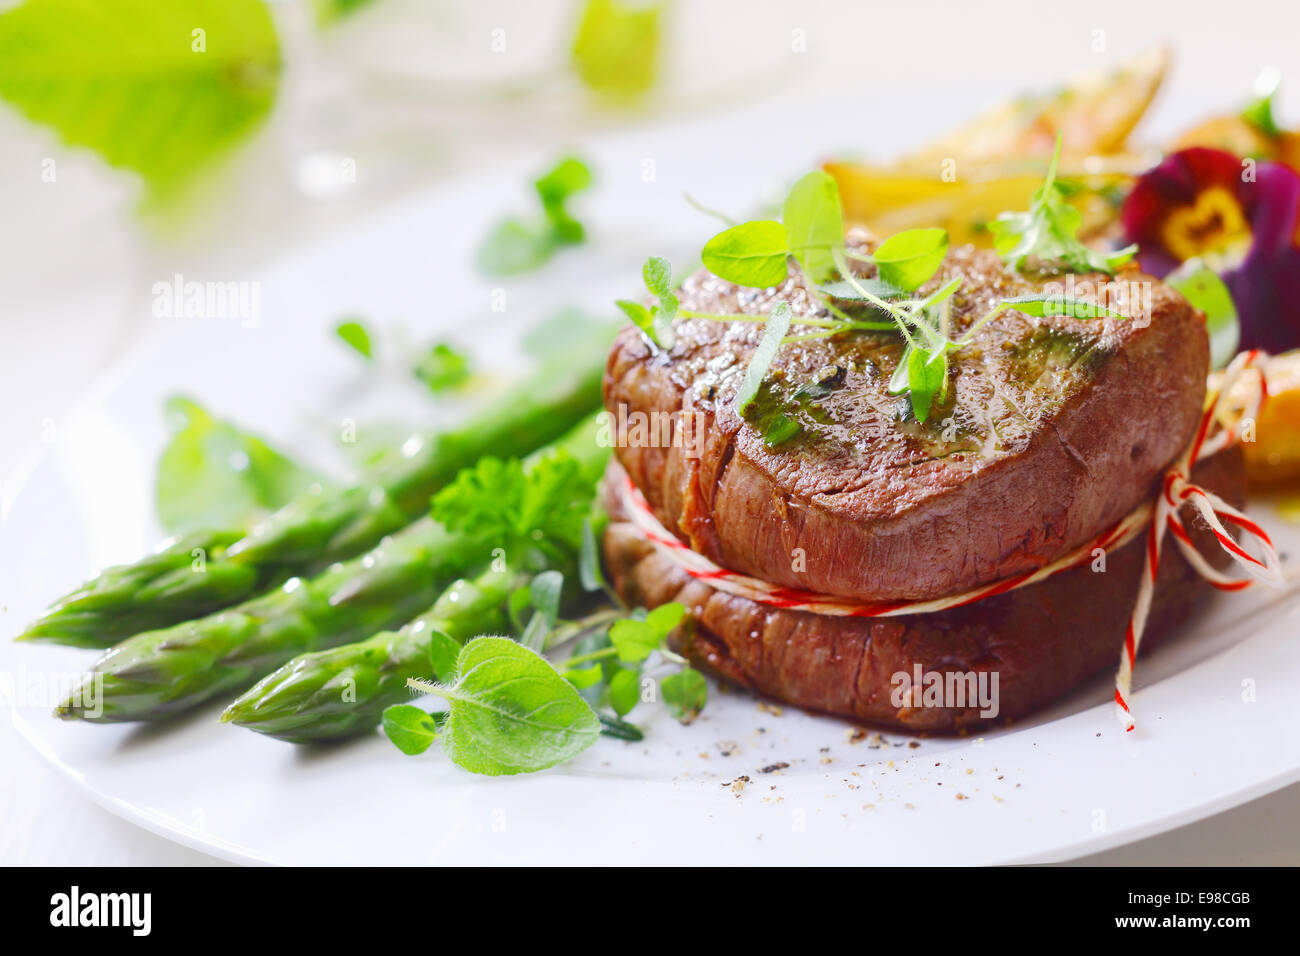 Medallion of roast fillet steak tied with string and served with fresh green asparagus tips and spears liberally garnished with Stock Photo